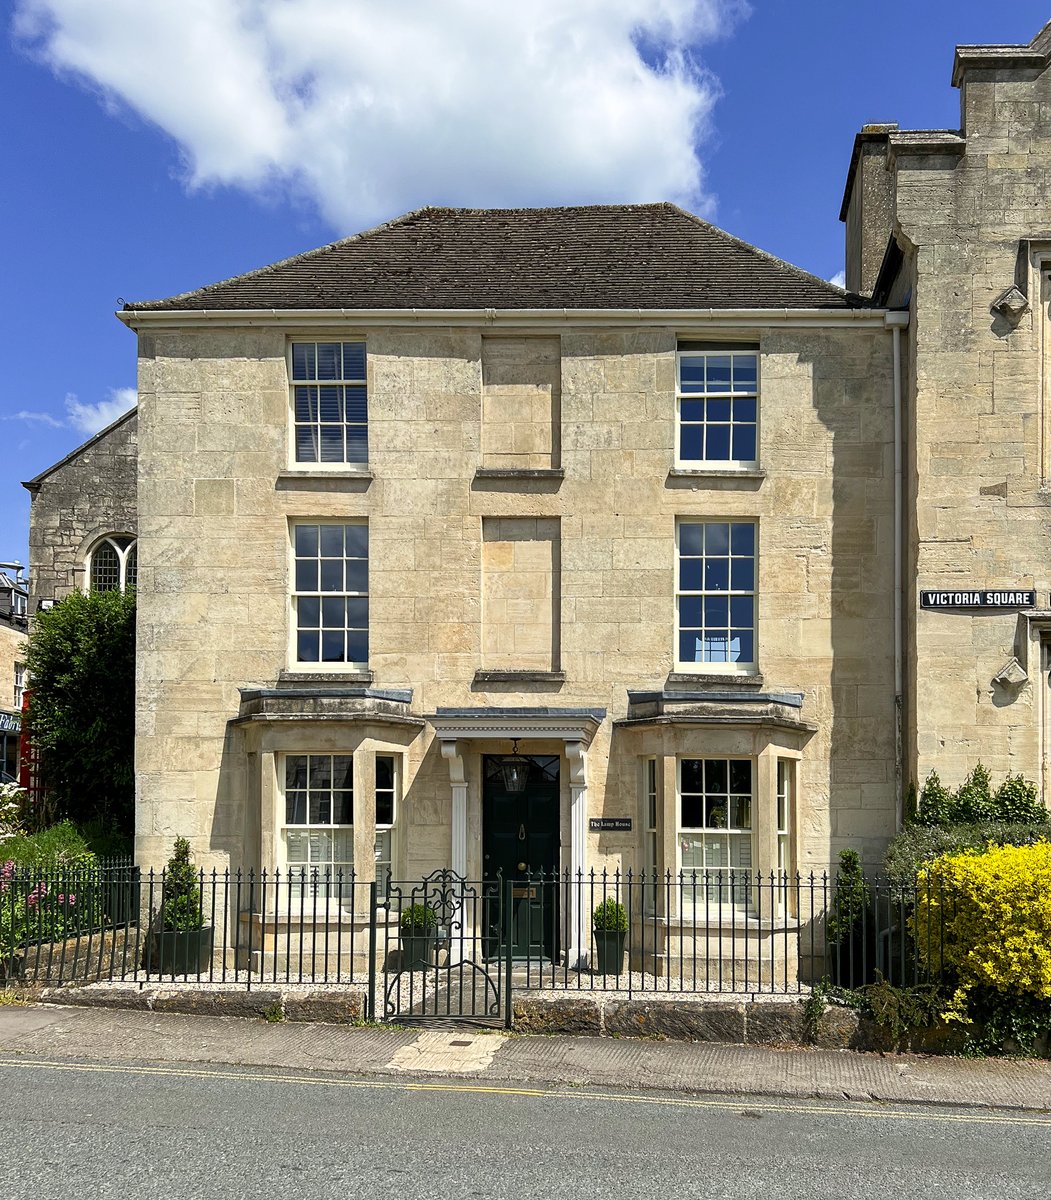 The Lamp House is located in the charming town of Painswick, situated at the corner of Victoria and New Streets. It offers stunning views of the iconic yew trees of St Mary's. The property is currently on the market with @MurraysEstAgent 

Get in touch for more info.
#cotswolds